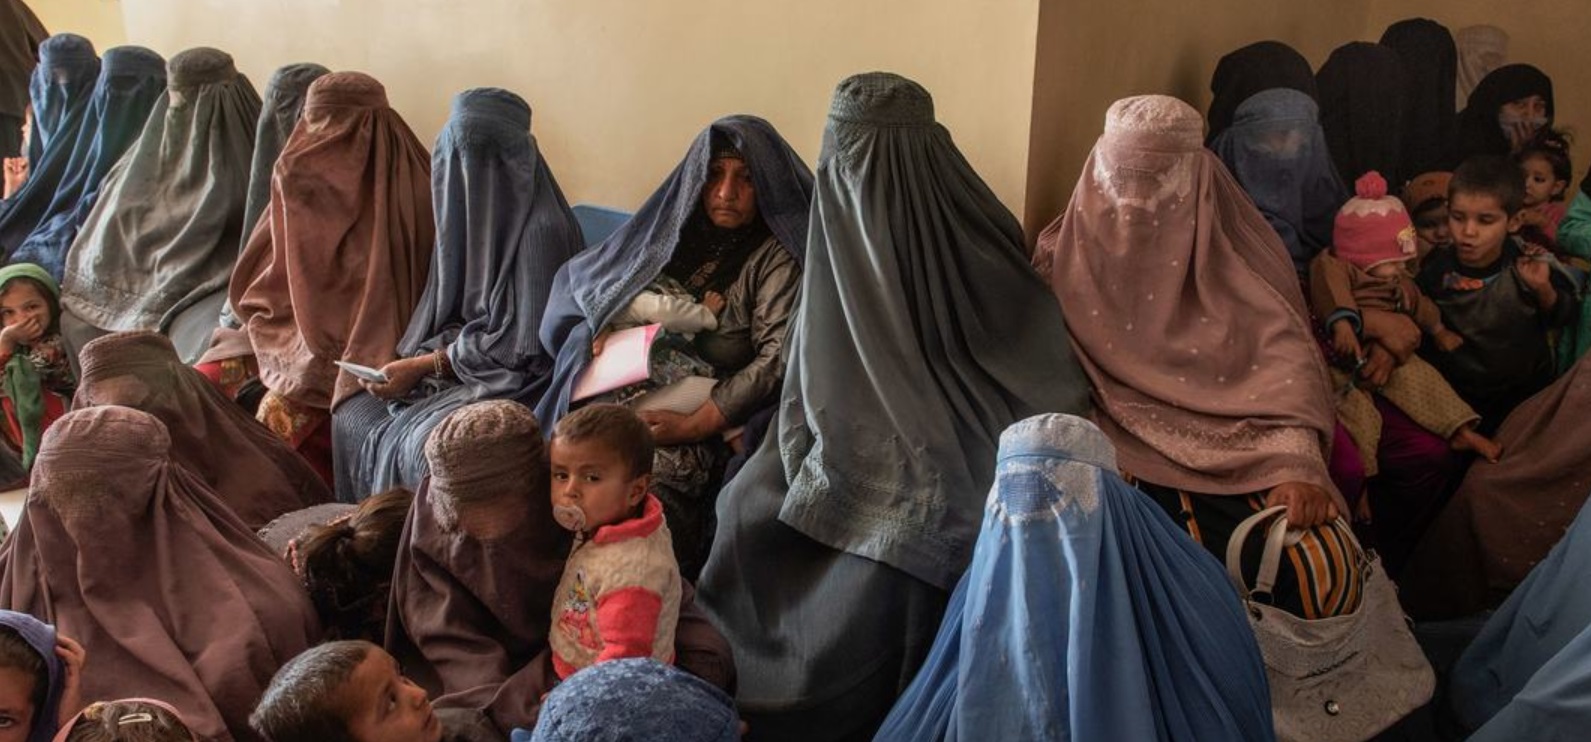 Women’s Day in Afghanistan: This Is What Was So Special There This Time